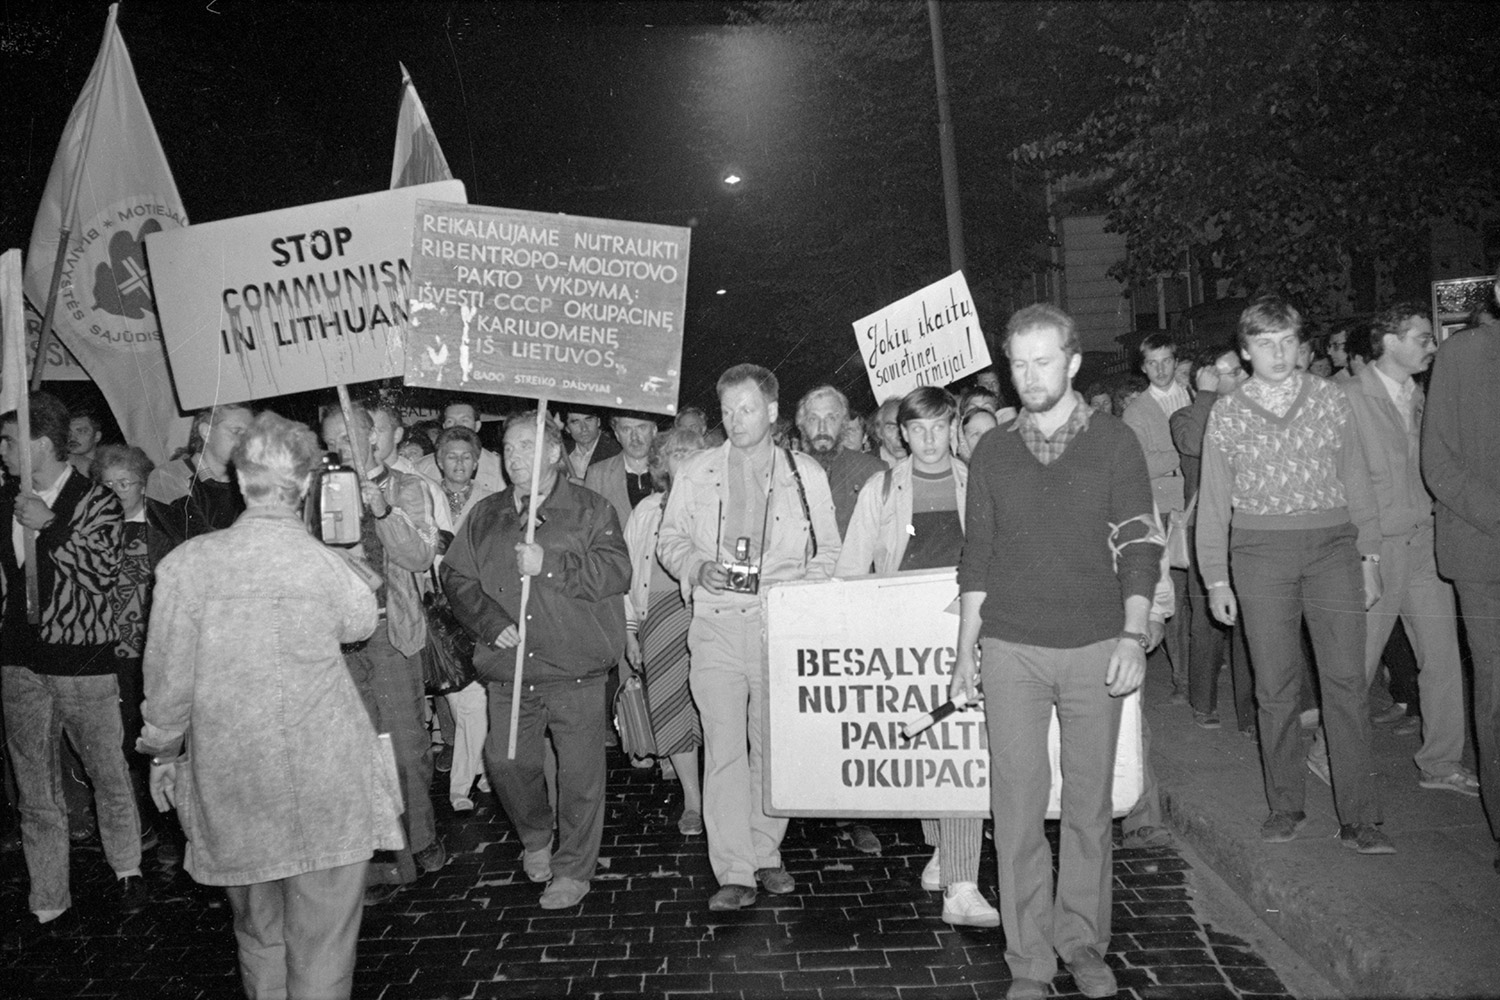 September 1989 – Mourning procession in Vilnius protesting the consequences of the Molotov-Ribbentrop Pact in Lithuania. LVCA, photographer: J. Juknevičius.